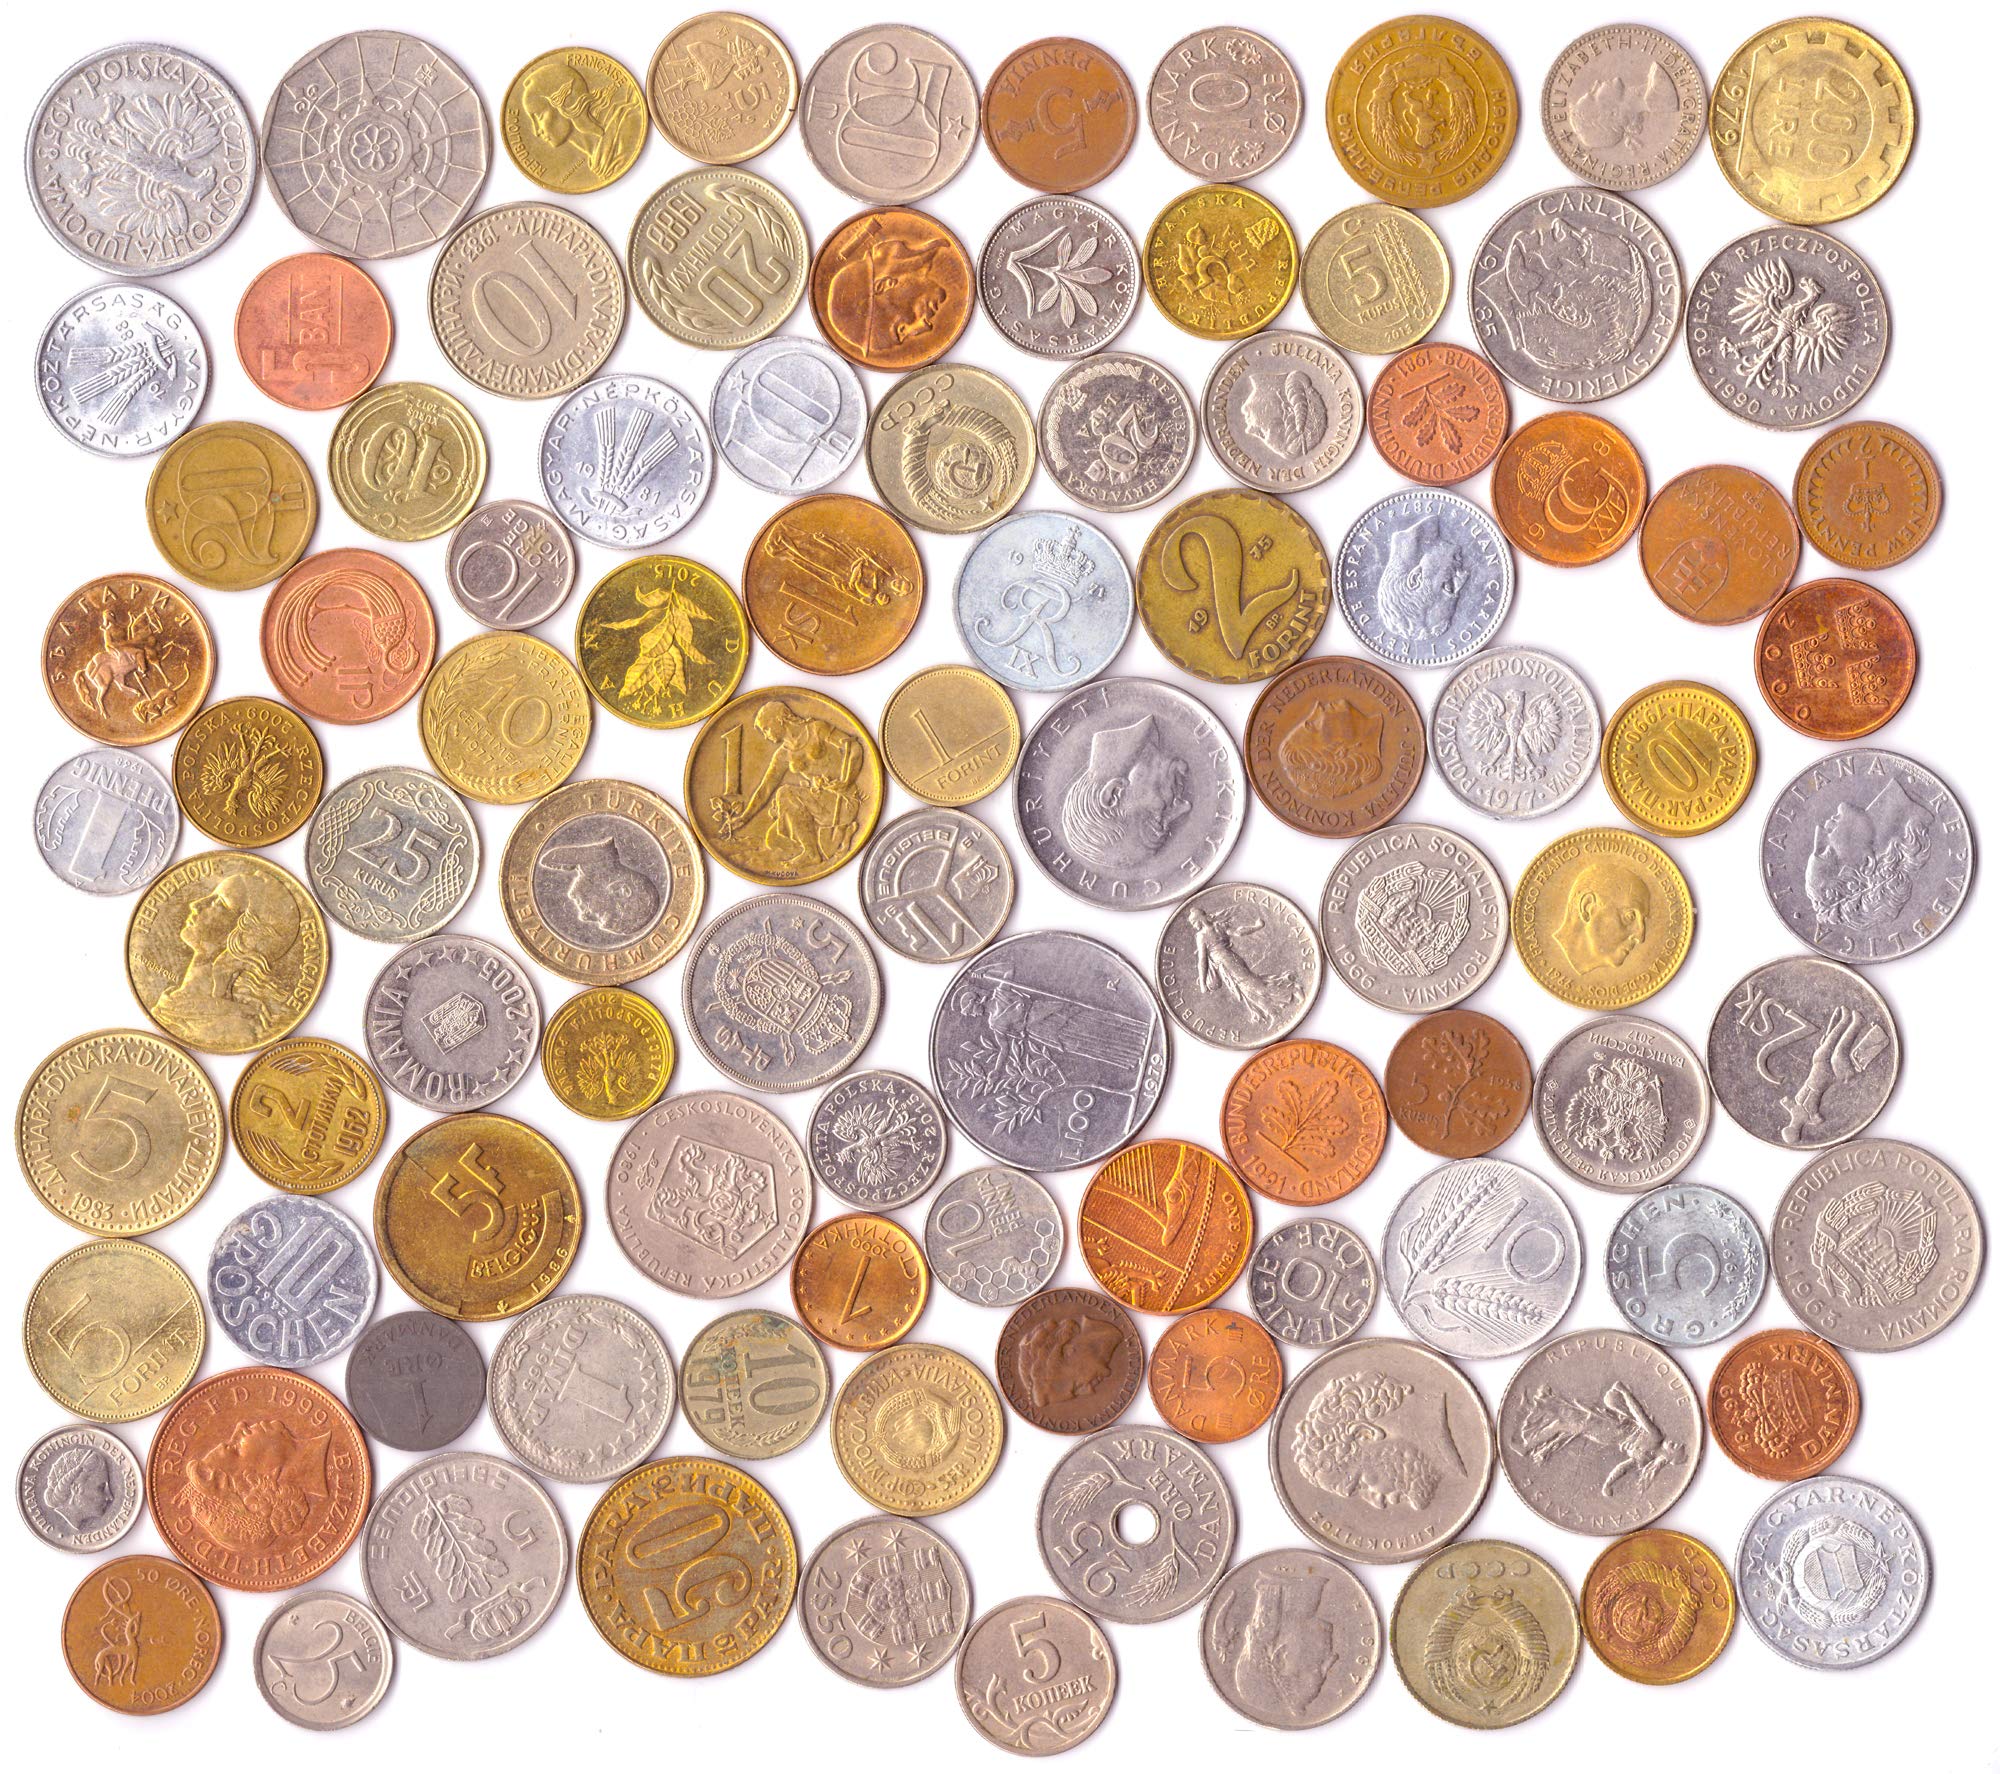 A diverse collection of bullion coins.